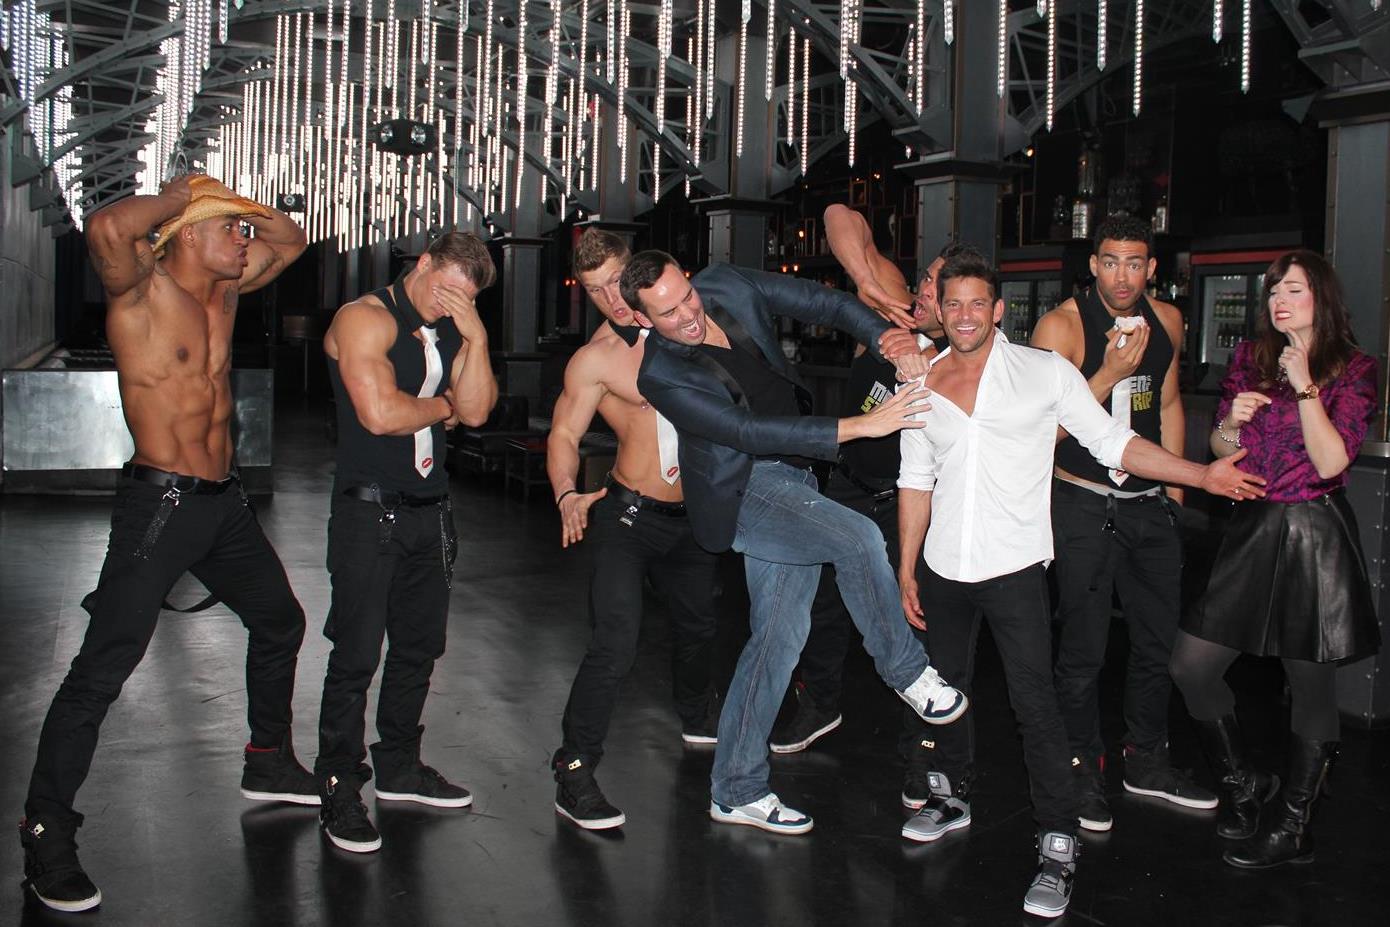 Jeff Timmon anf Mr. Fab 98 Degrees Men of the strip (1)